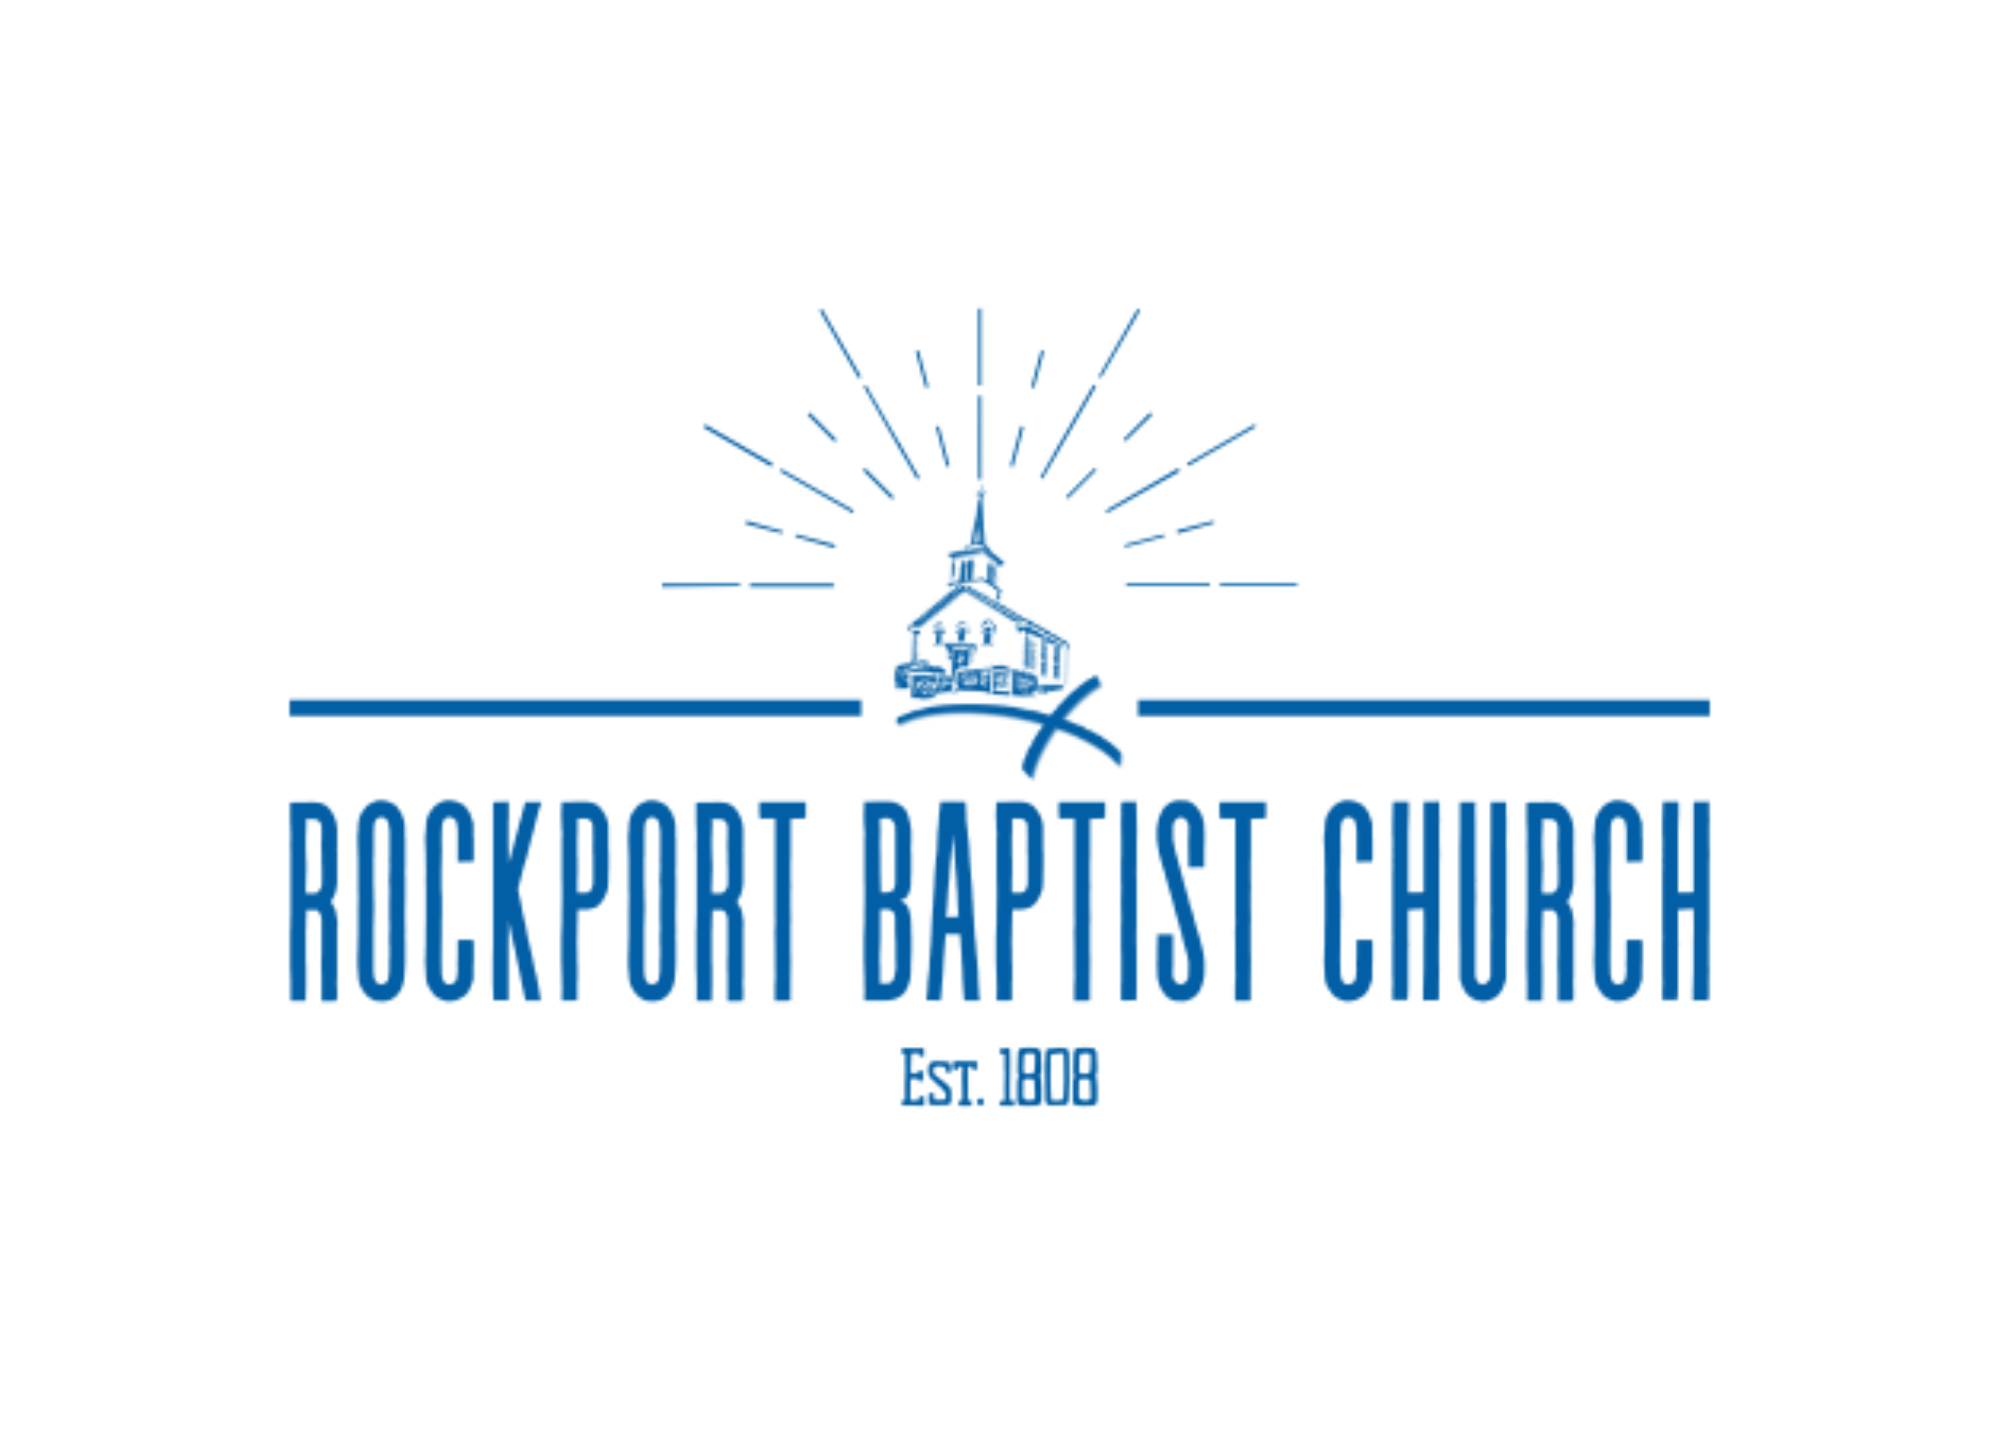 First Baptist Church of Rockport